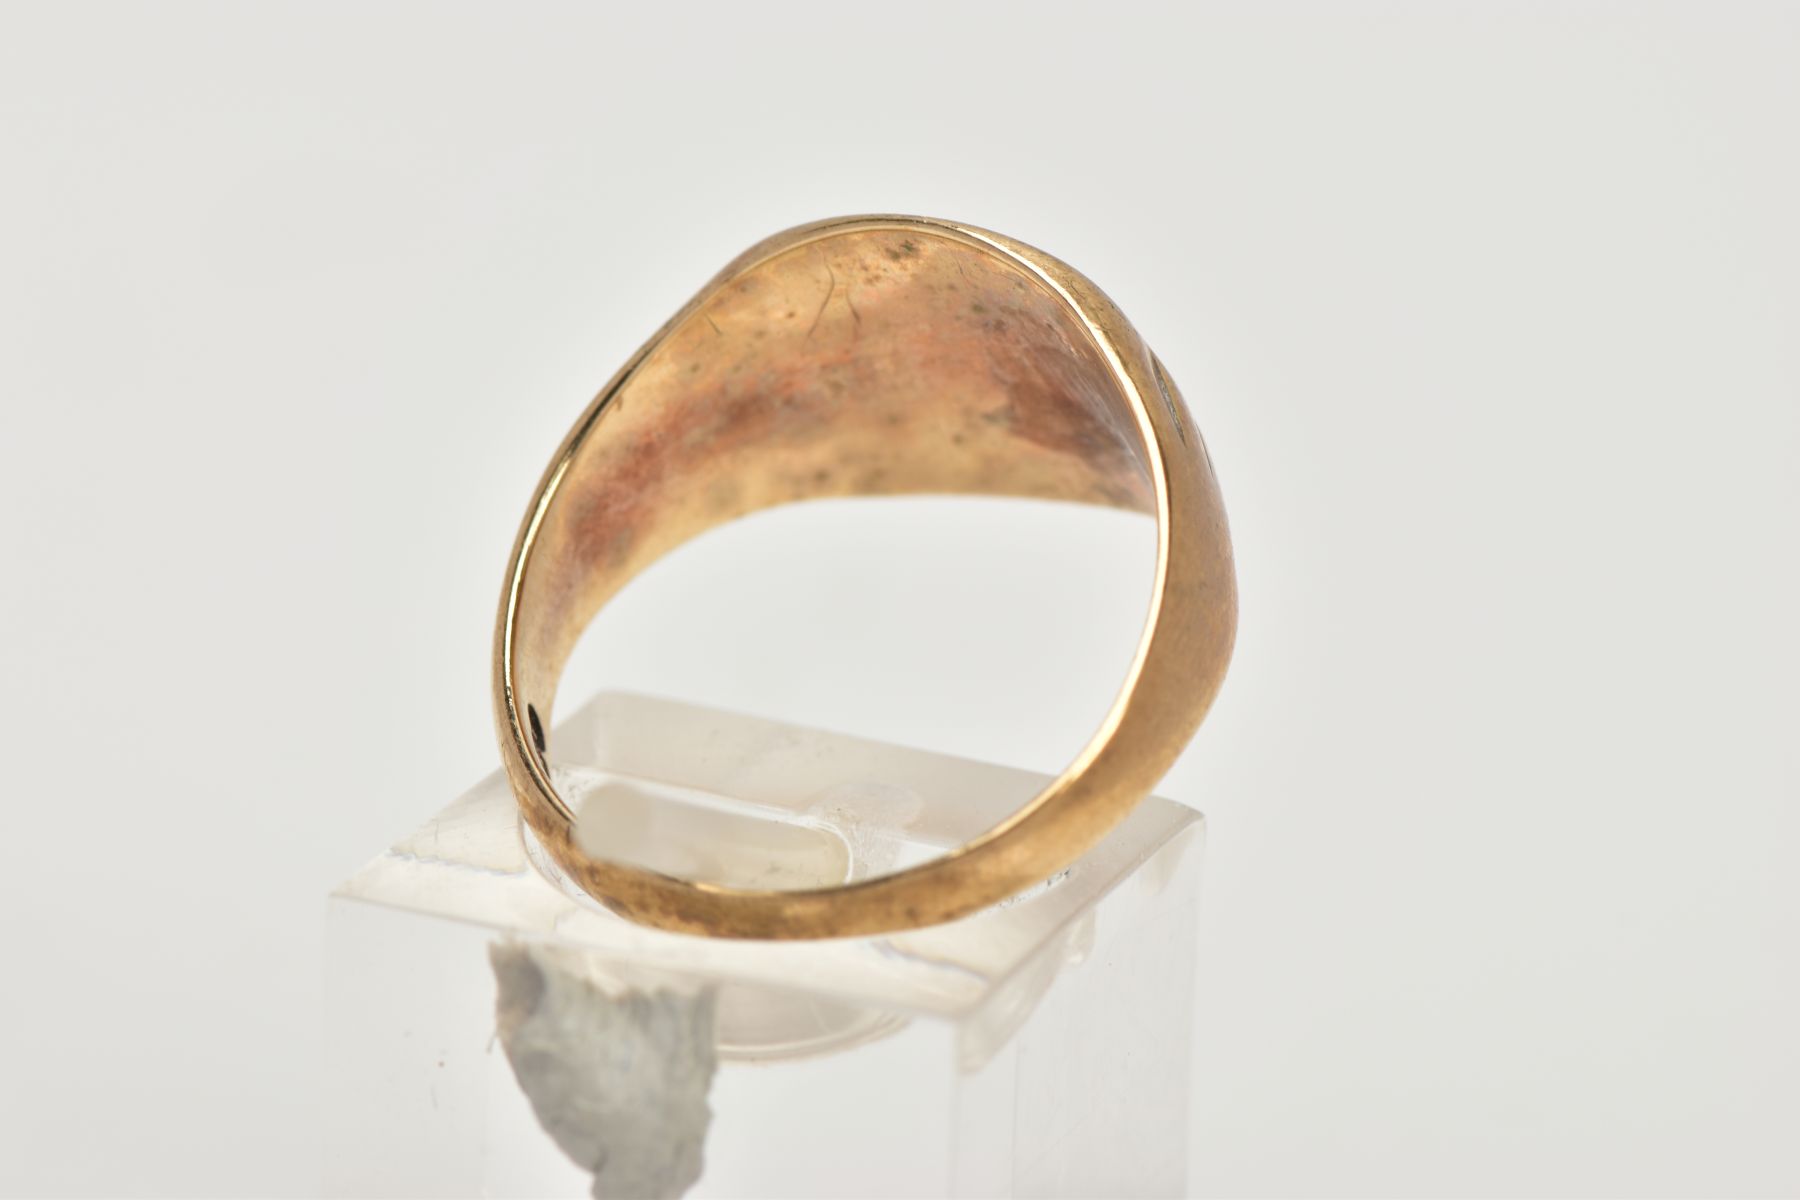 A 9CT GOLD SQUARE SIGNET RING, engraved detail on the face, approximately 12.4mm at the widest - Image 3 of 4